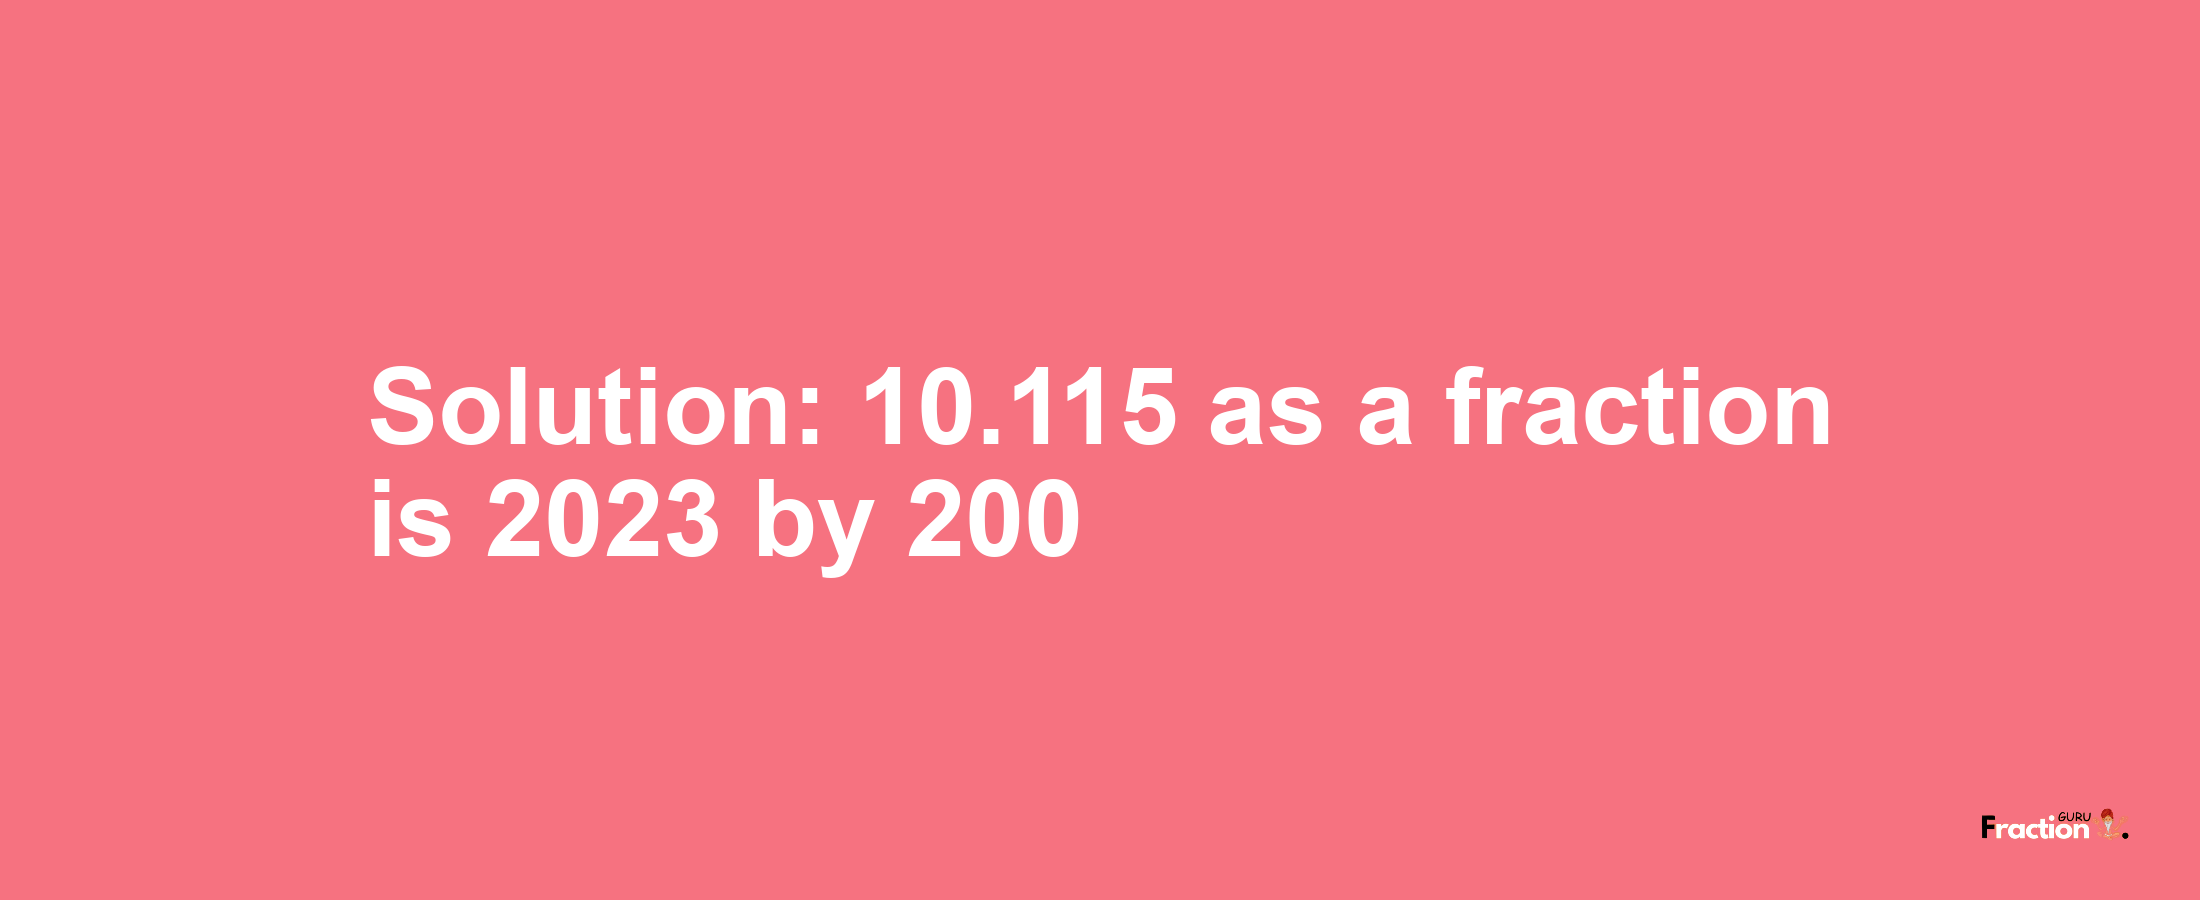 Solution:10.115 as a fraction is 2023/200